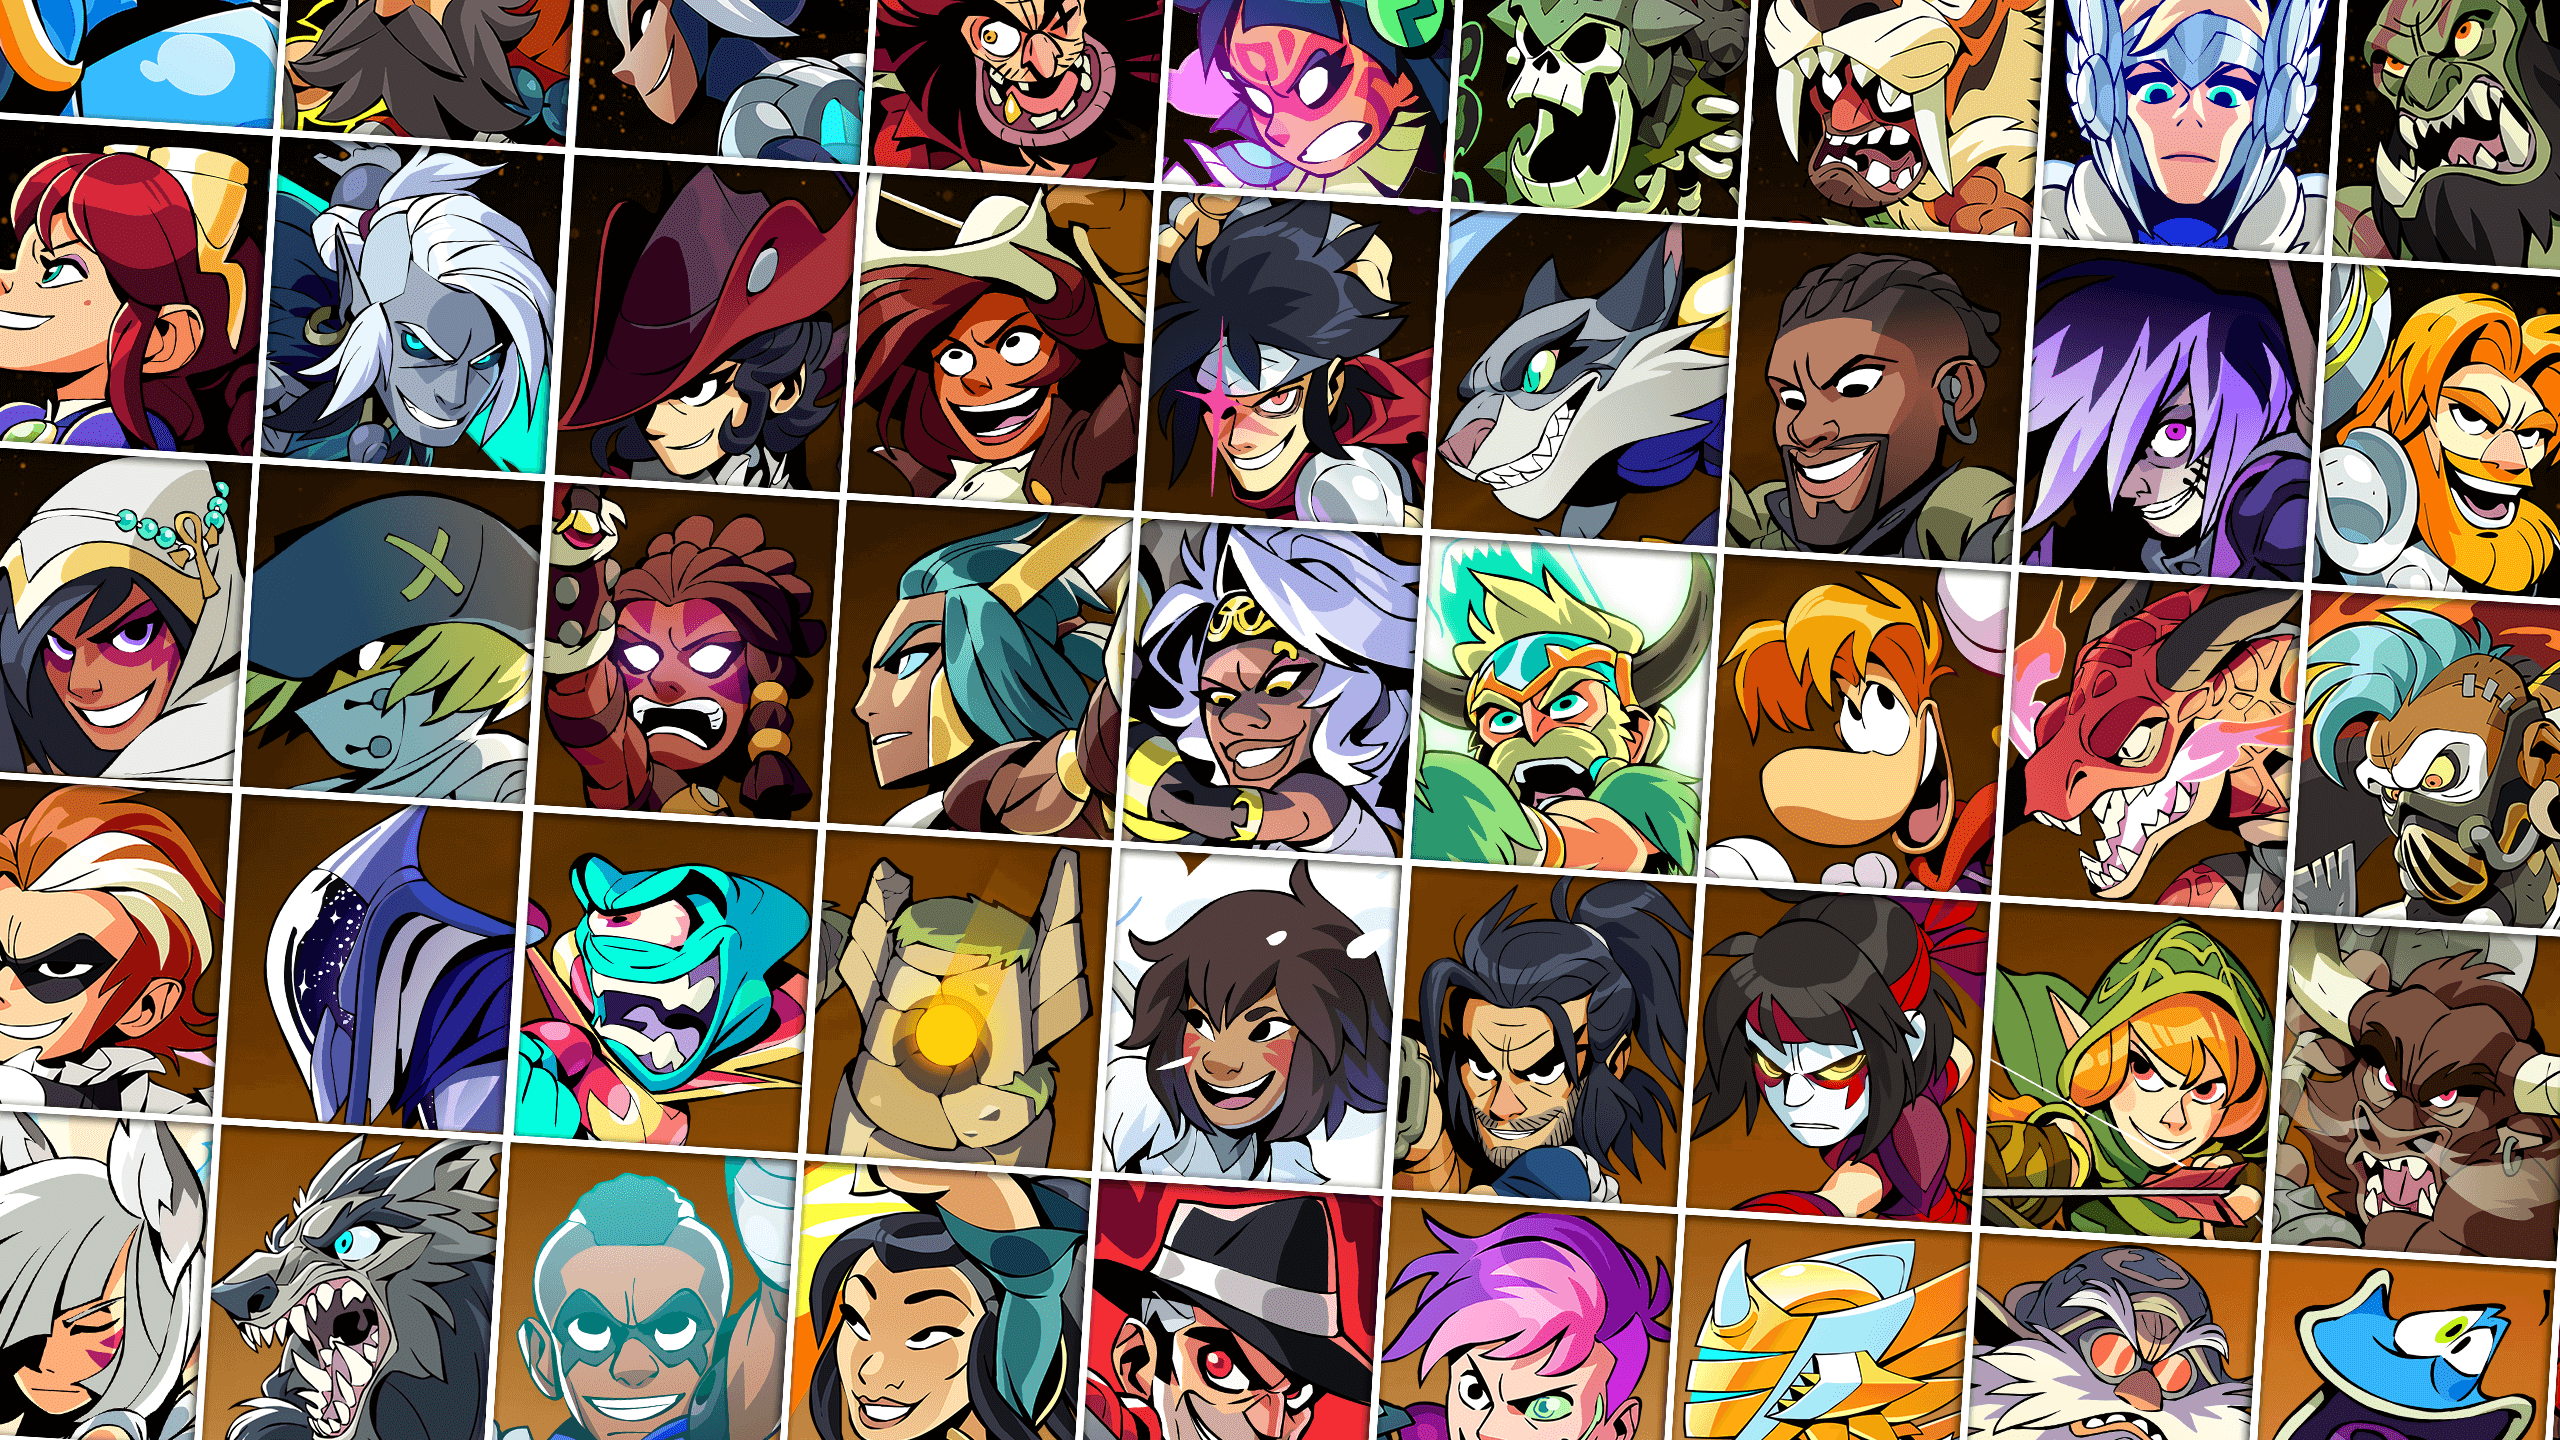 Is Brawlhalla Crossplay? - Cross Progression and Inventory Update Status